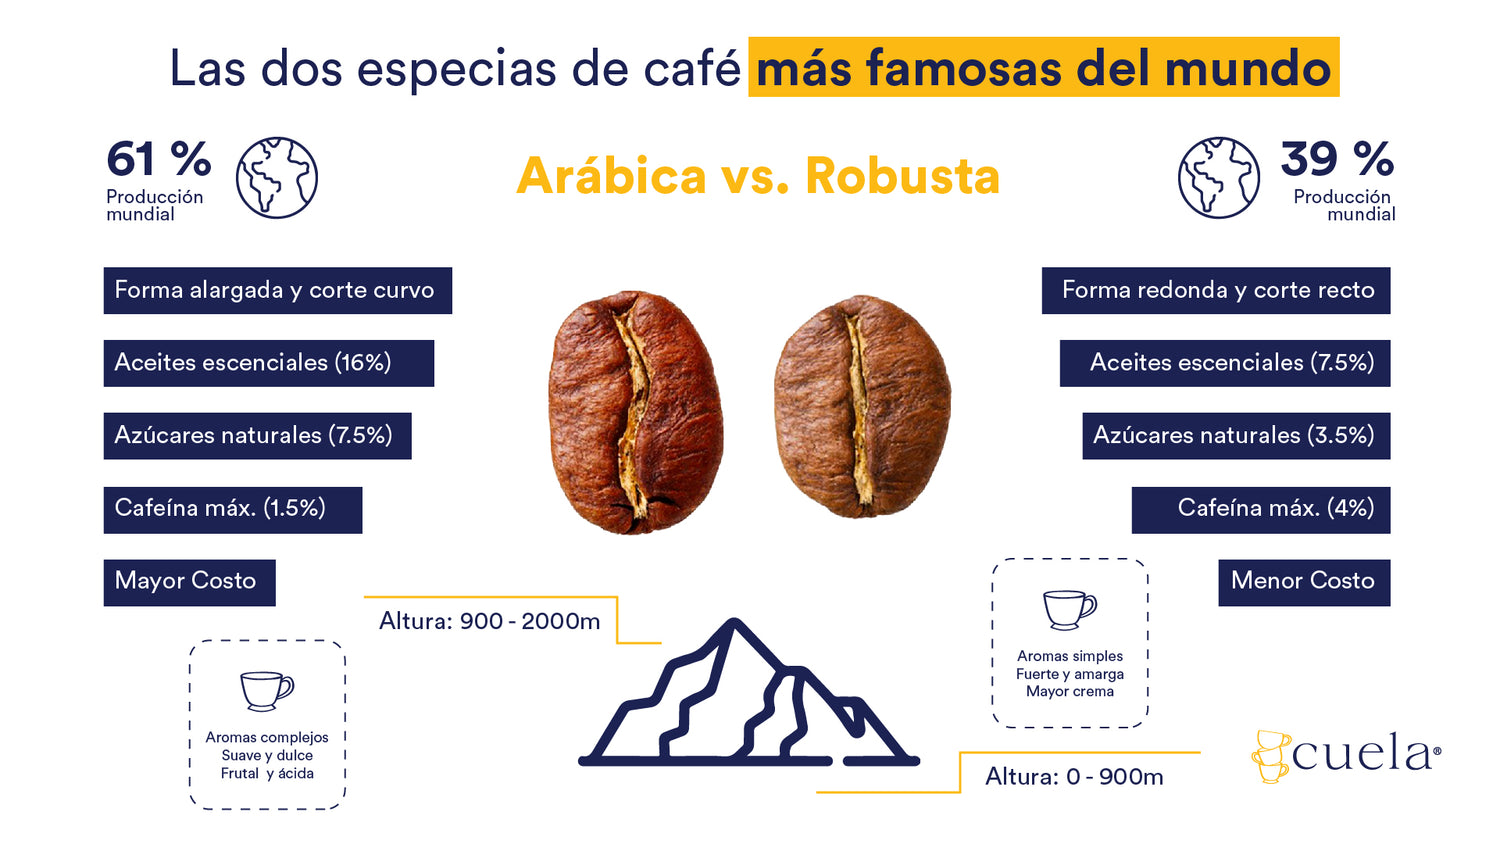 The two most famous coffee species in the World